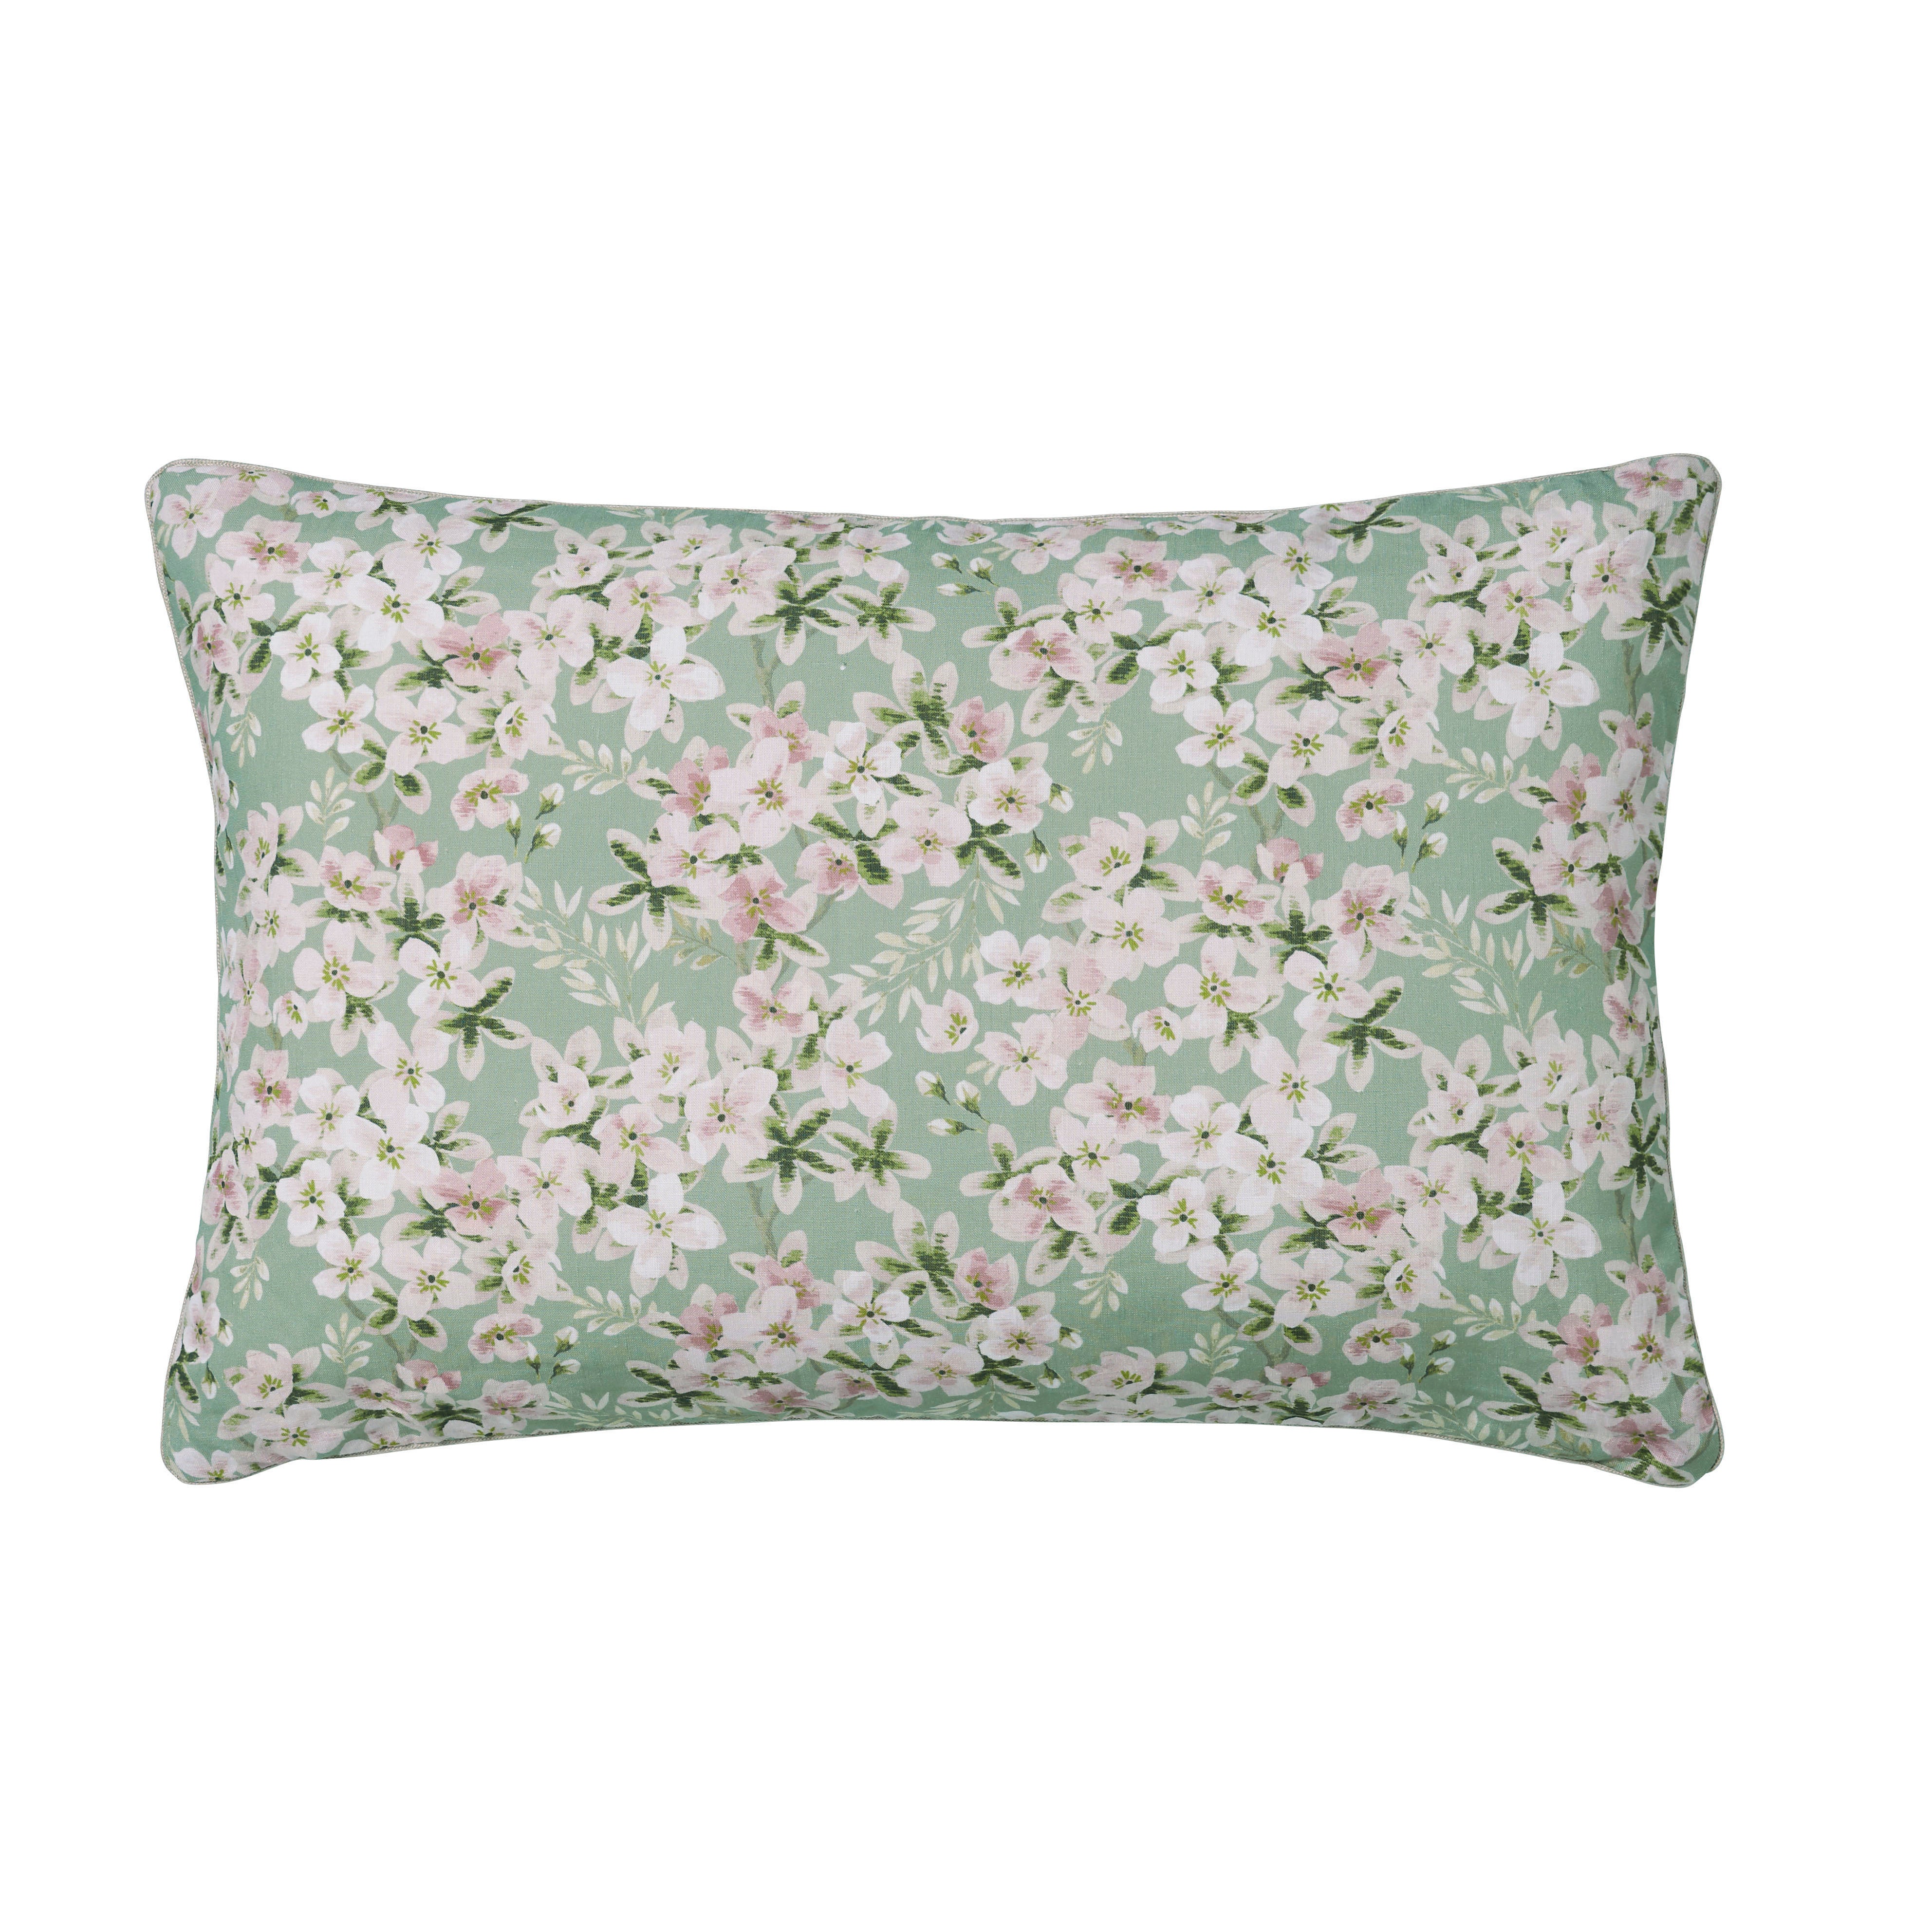 bloom cushion cover by alexandre turpault on adorn.house